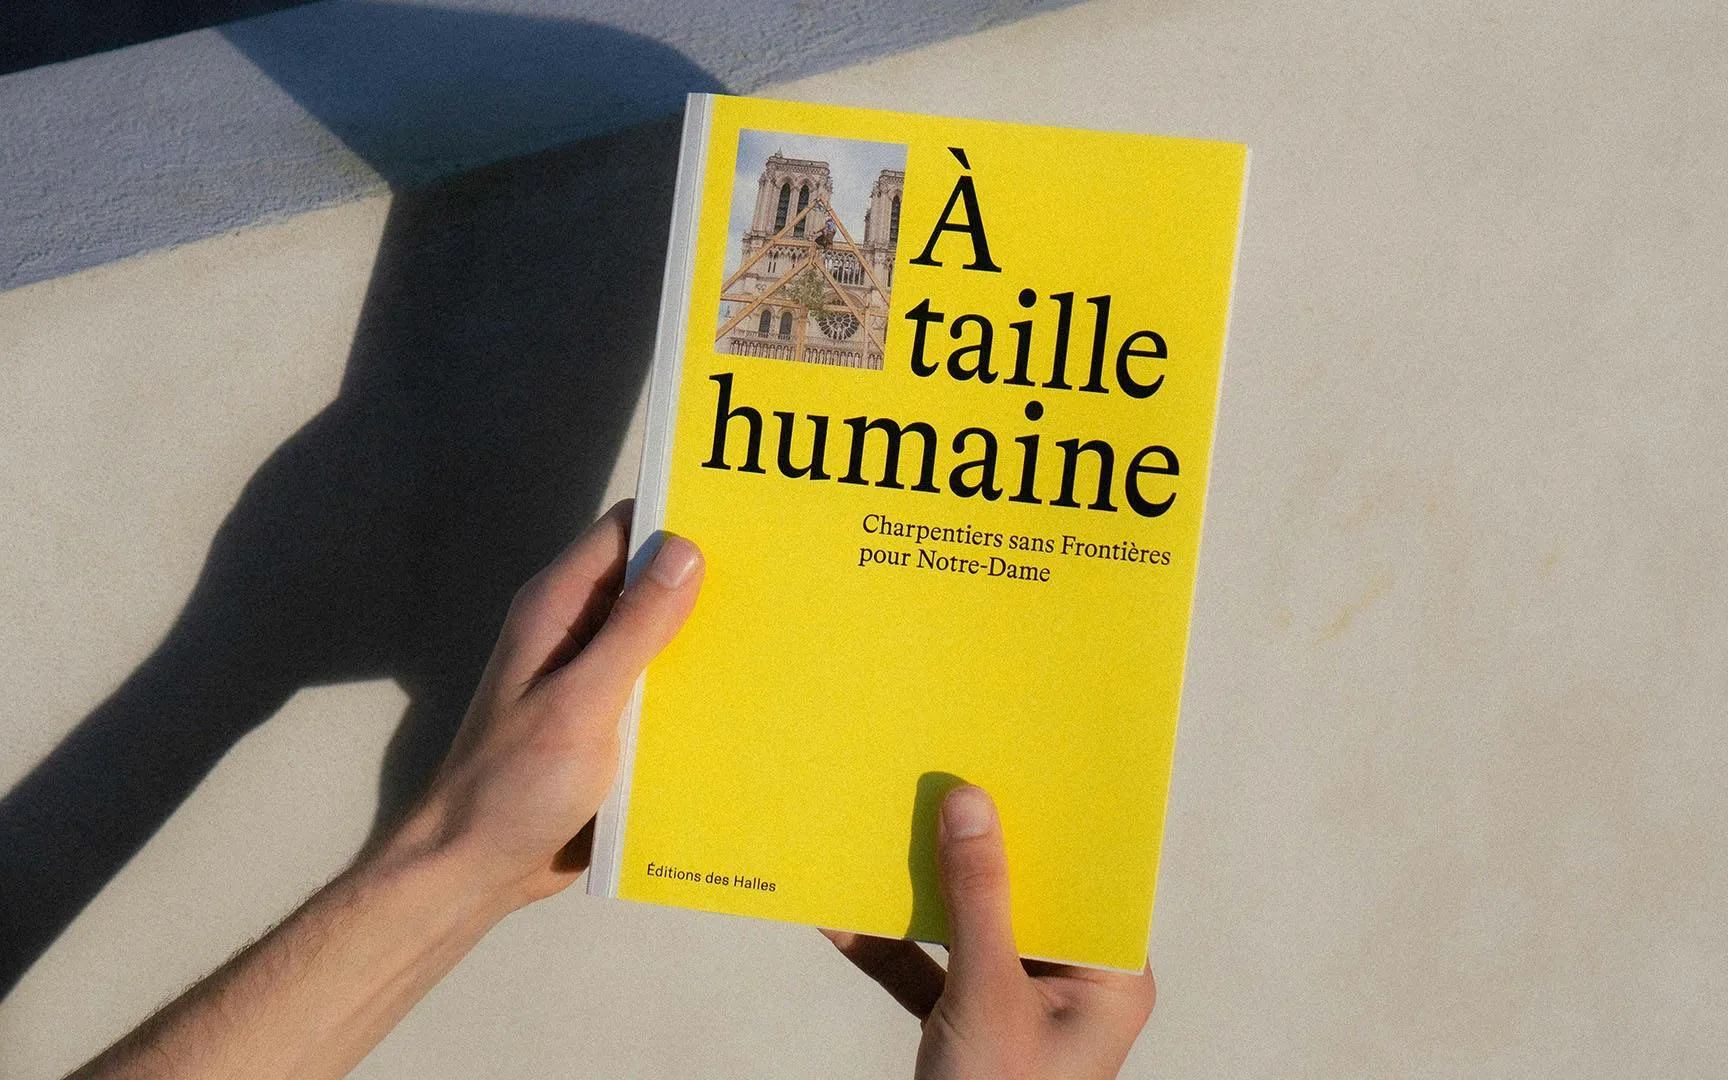 Book by charpentiers sans Frontières, A Taille Humaine – Design by Arthur Calame